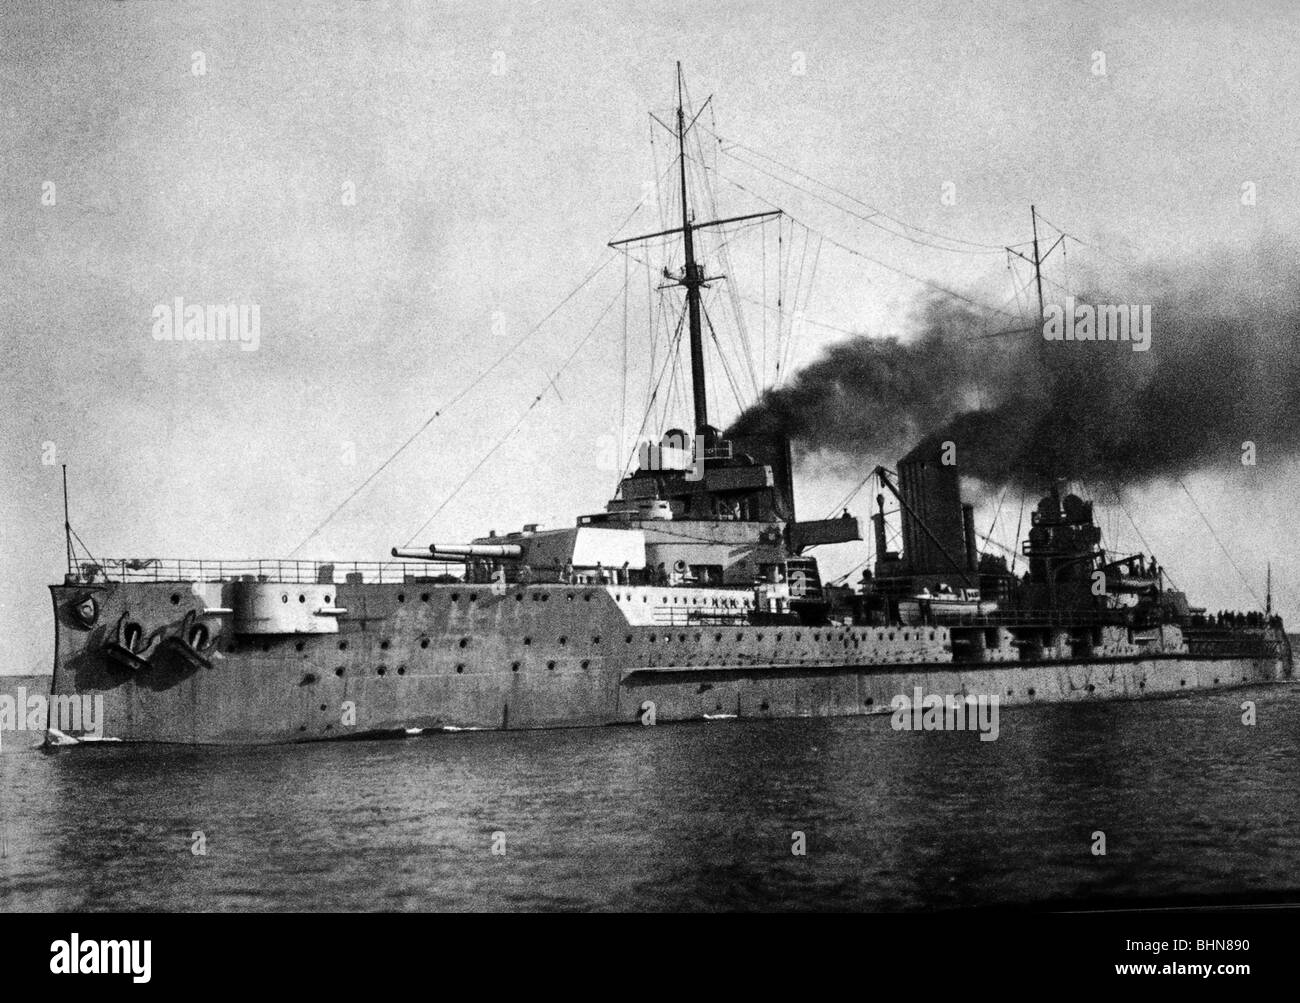 transport / transportation, navigation, warships, Germany, battlecruiser 'SMS Von der Tann', launched on 20.3.1909, scuttled in Scapa Flow on 21.6.1919, photo by Carl Speck, Kiel, 1909, Stock Photo